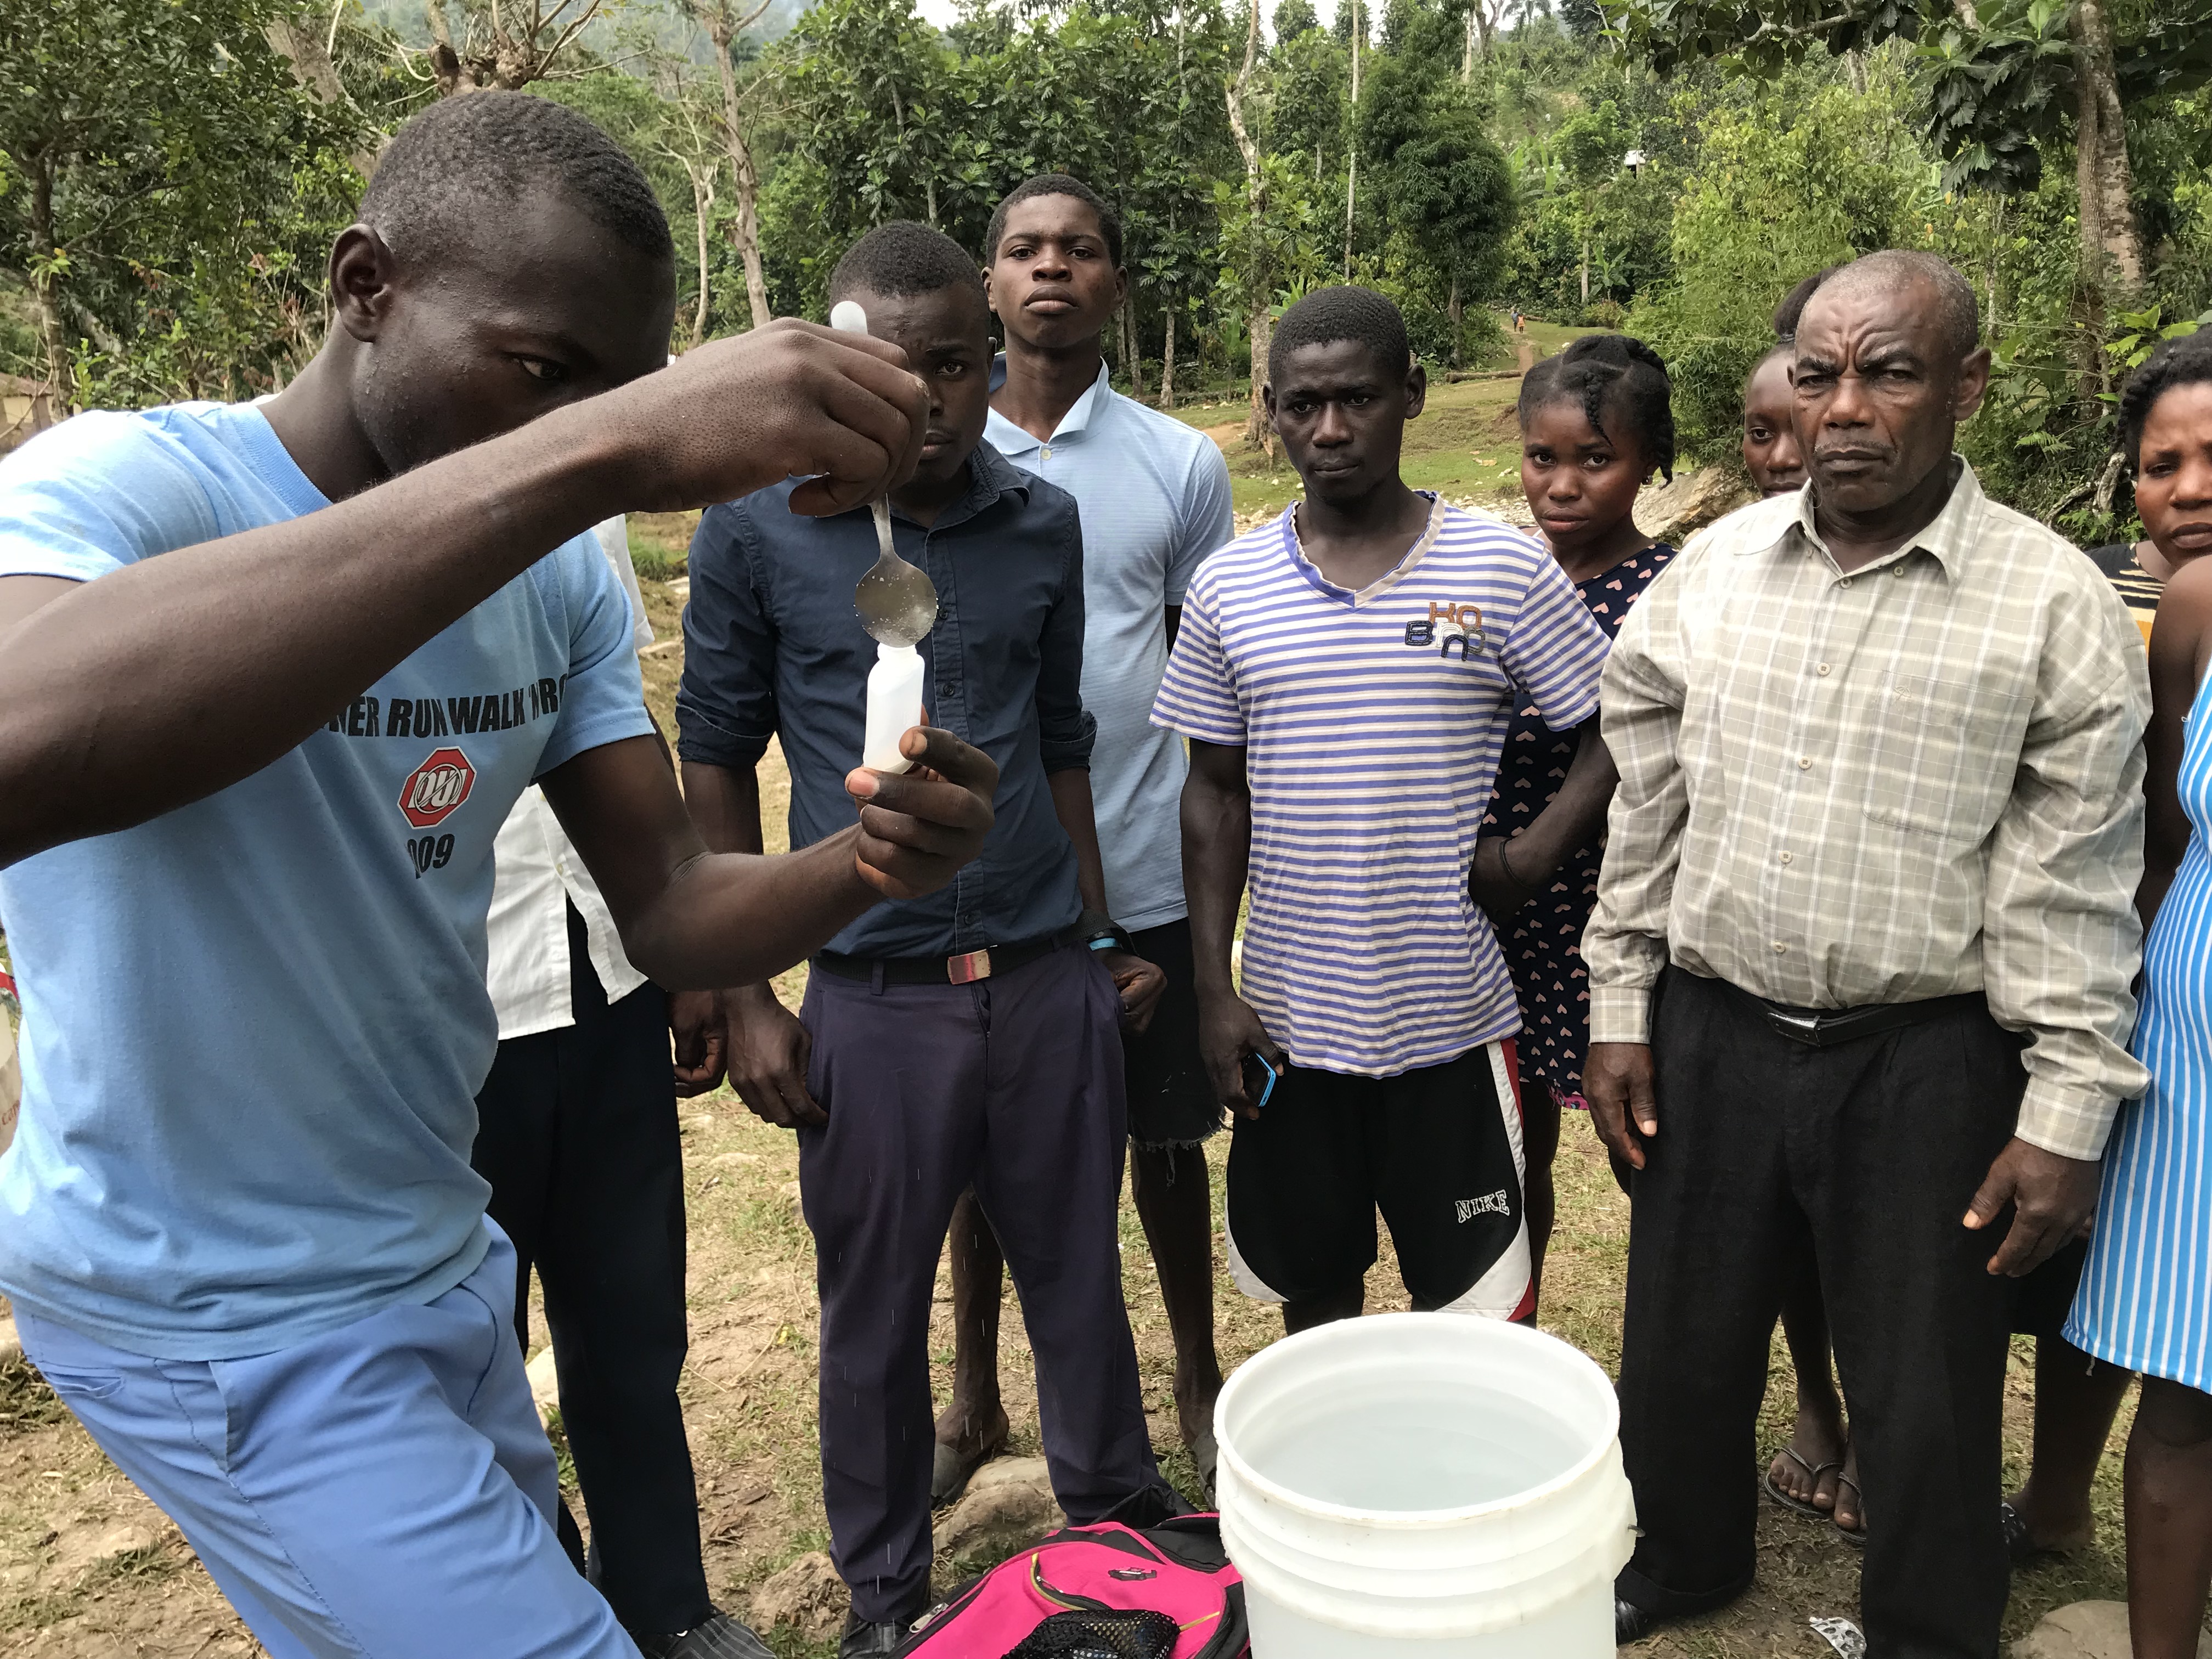 Portable Electrolytic Purifiers are changing the lives of locals in Port-Au-Prince Haiti. In partnership with Friar Suppliers, Aqua Research, LL...